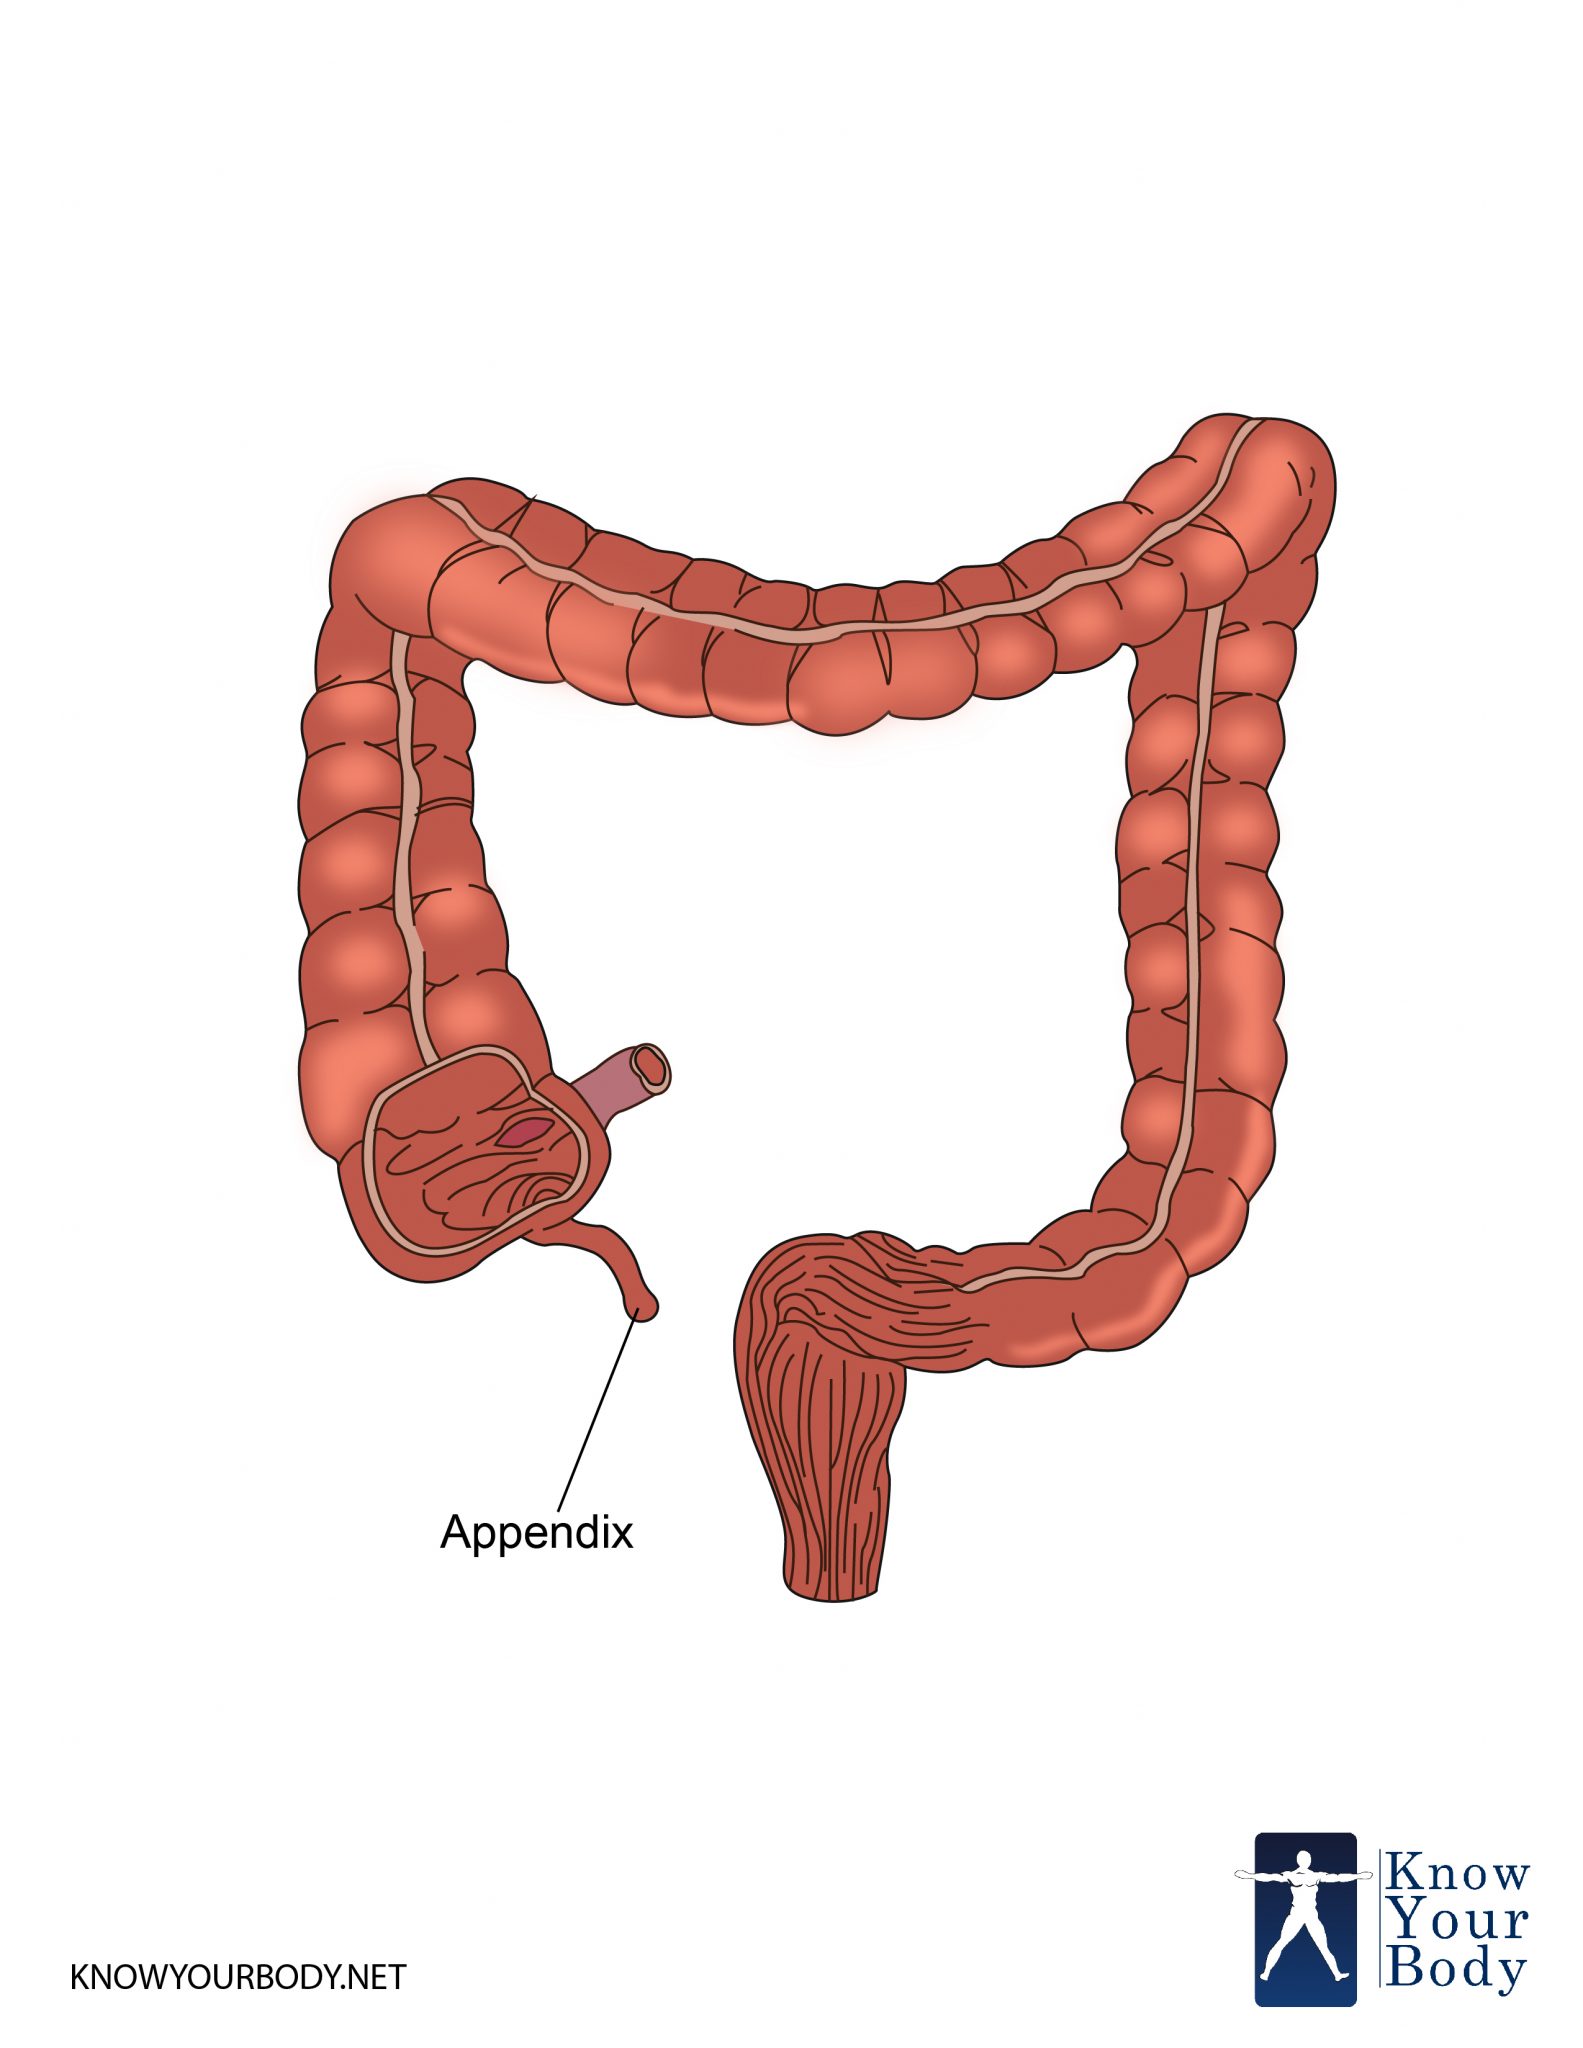 Appendix - Location, Function, Anatomy and FAQs